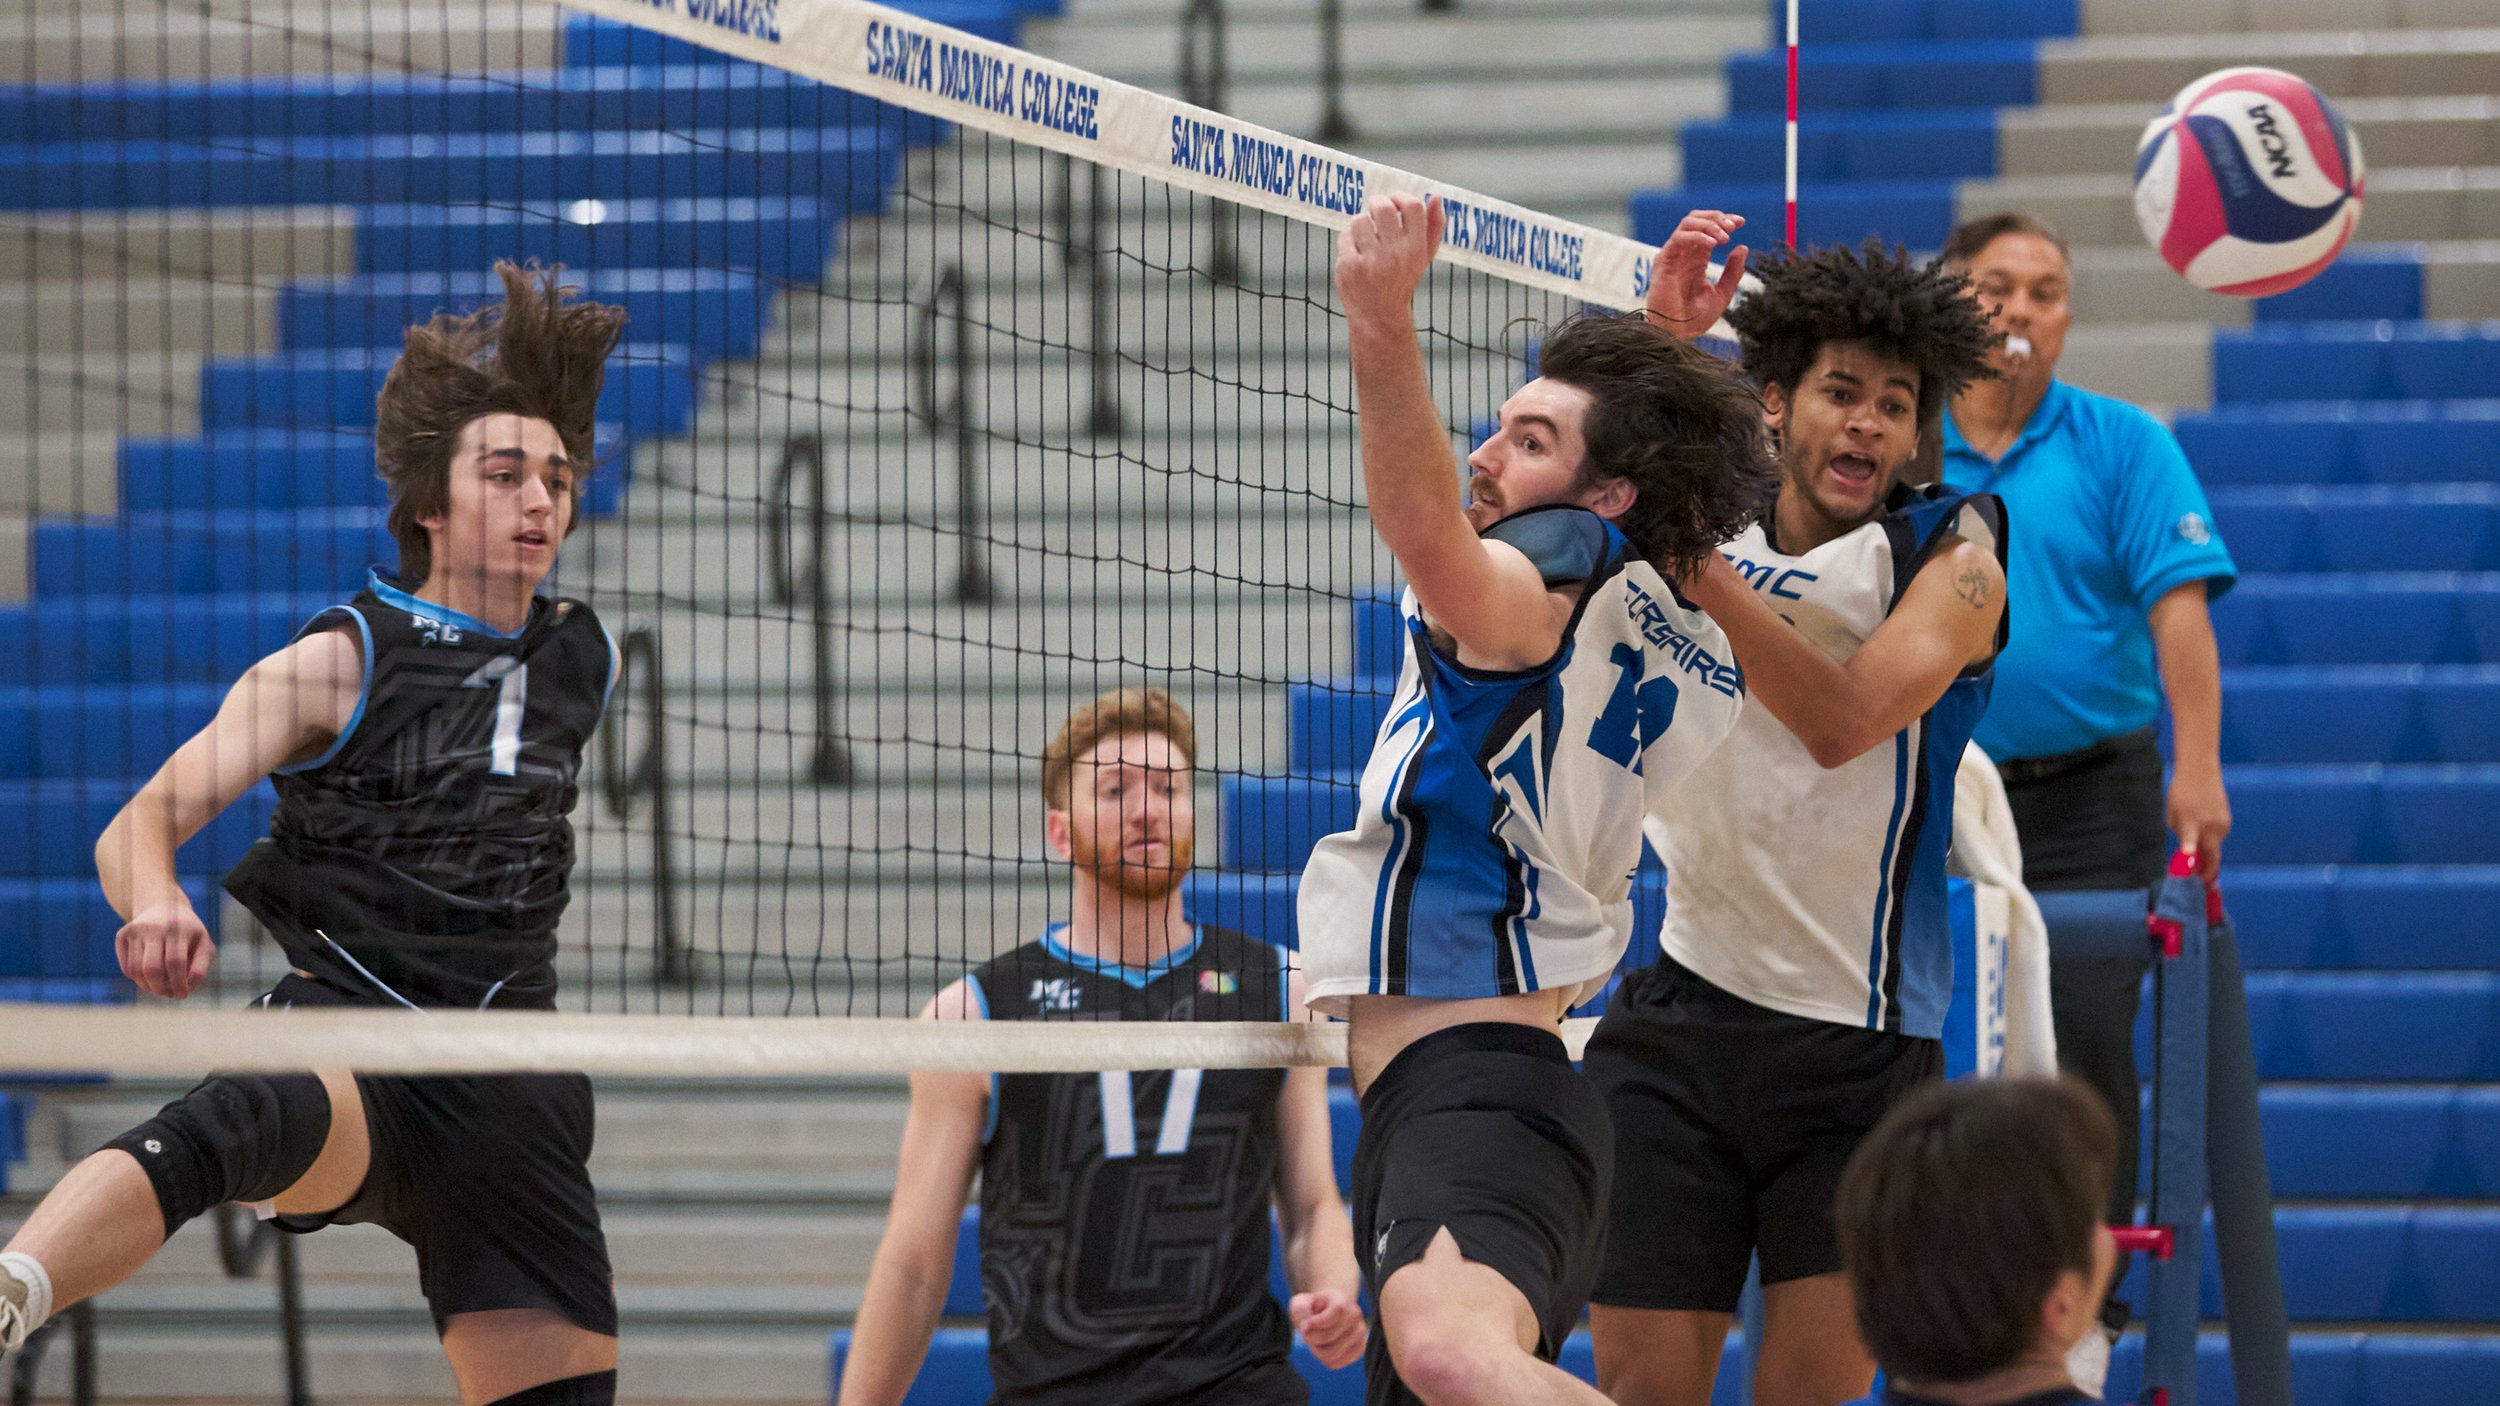  Moorpark College Raiders' Oliver Herron hits the ball past Santa Monica College Corsairs' Jonathan Pritchard and Nate Davis during the men's volleyball match on Wednesday, April 12, 2023, at Corsair Gym in Santa Monica, Calif. The Corsairs lost 3-0.